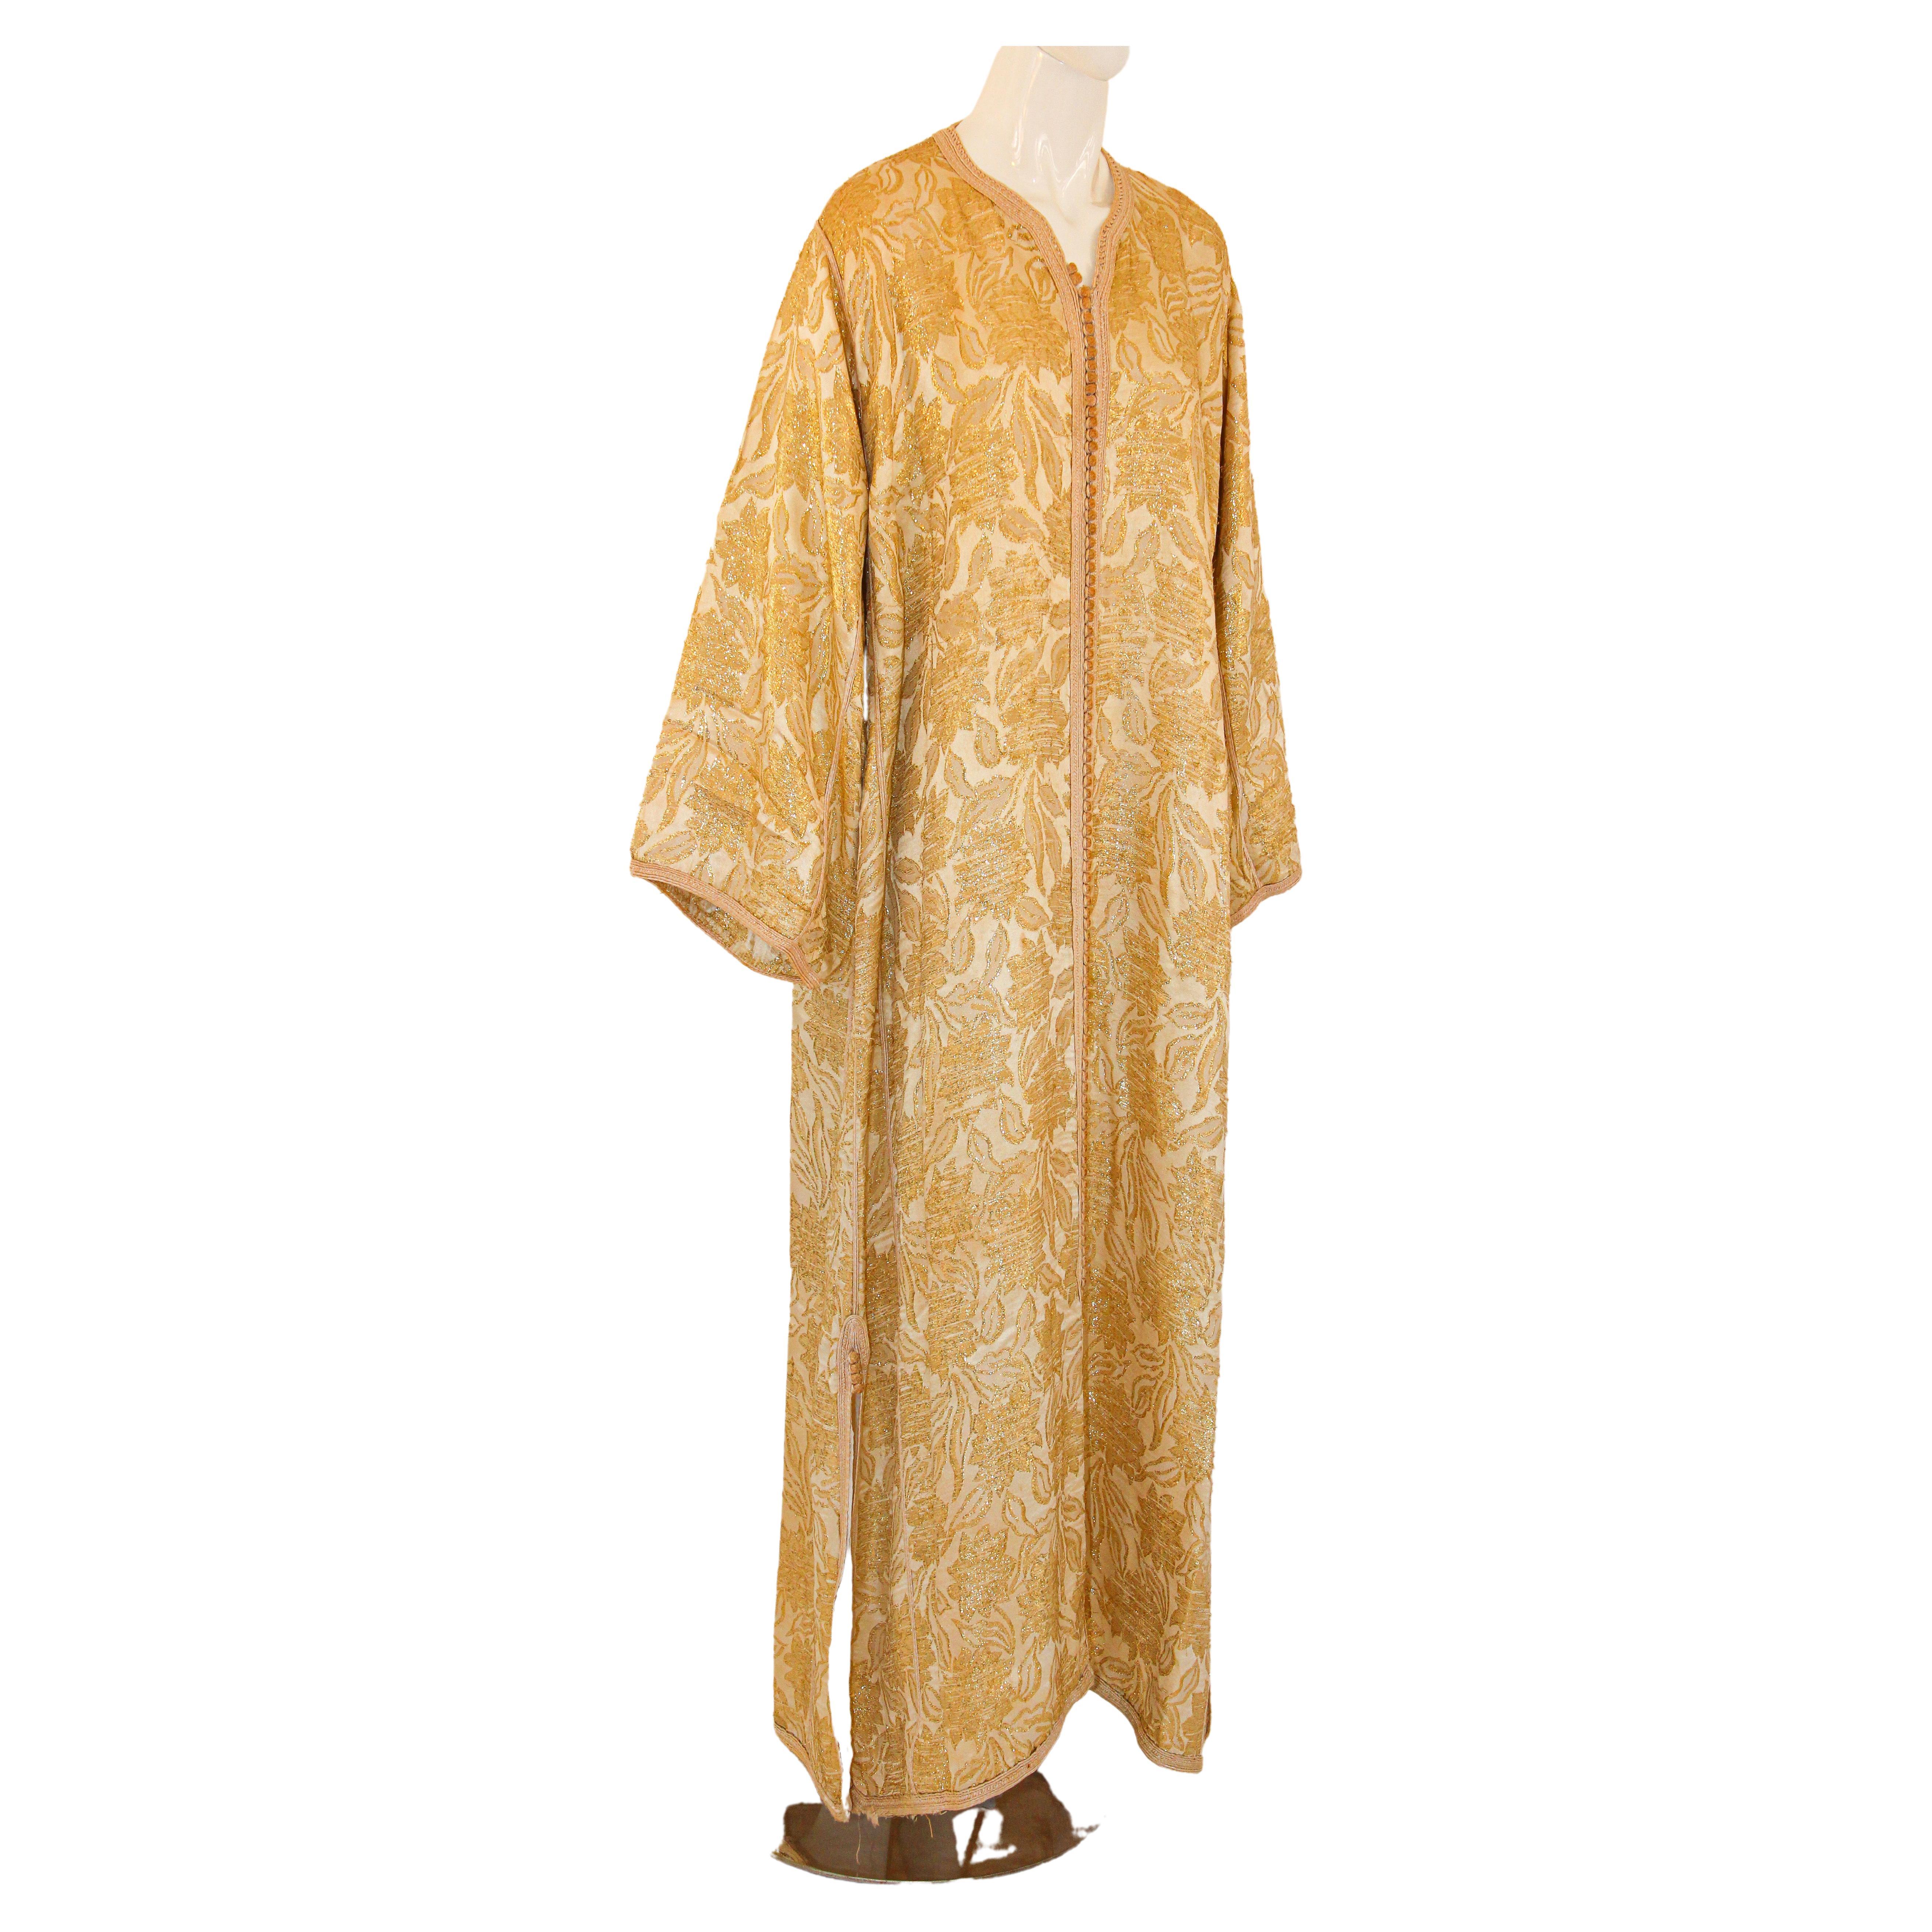 1940s Moroccan Antique Caftan Gold Damask Embroidered Caftan Maxi Dress For Sale